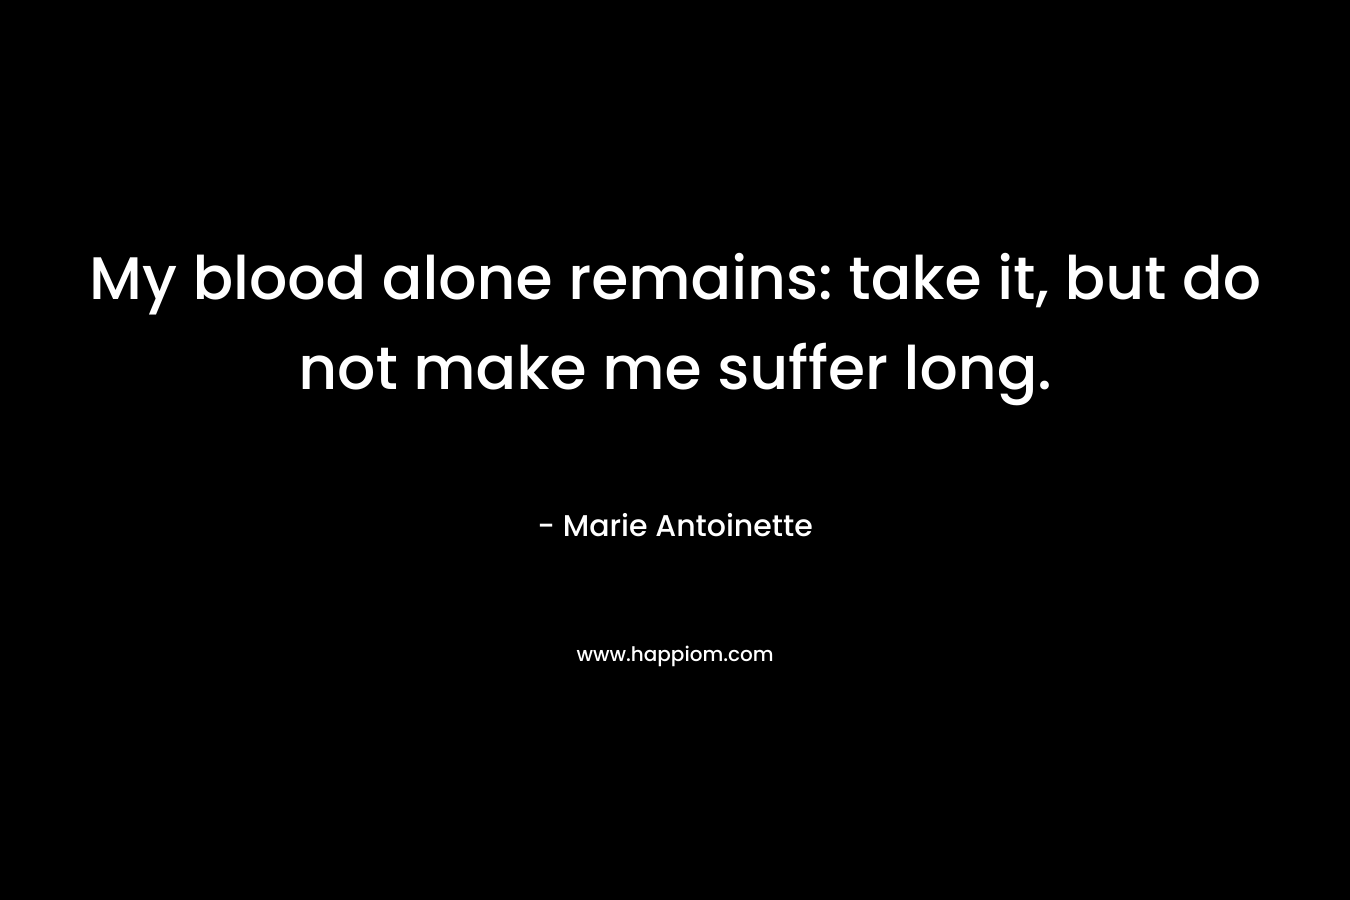 My blood alone remains: take it, but do not make me suffer long.